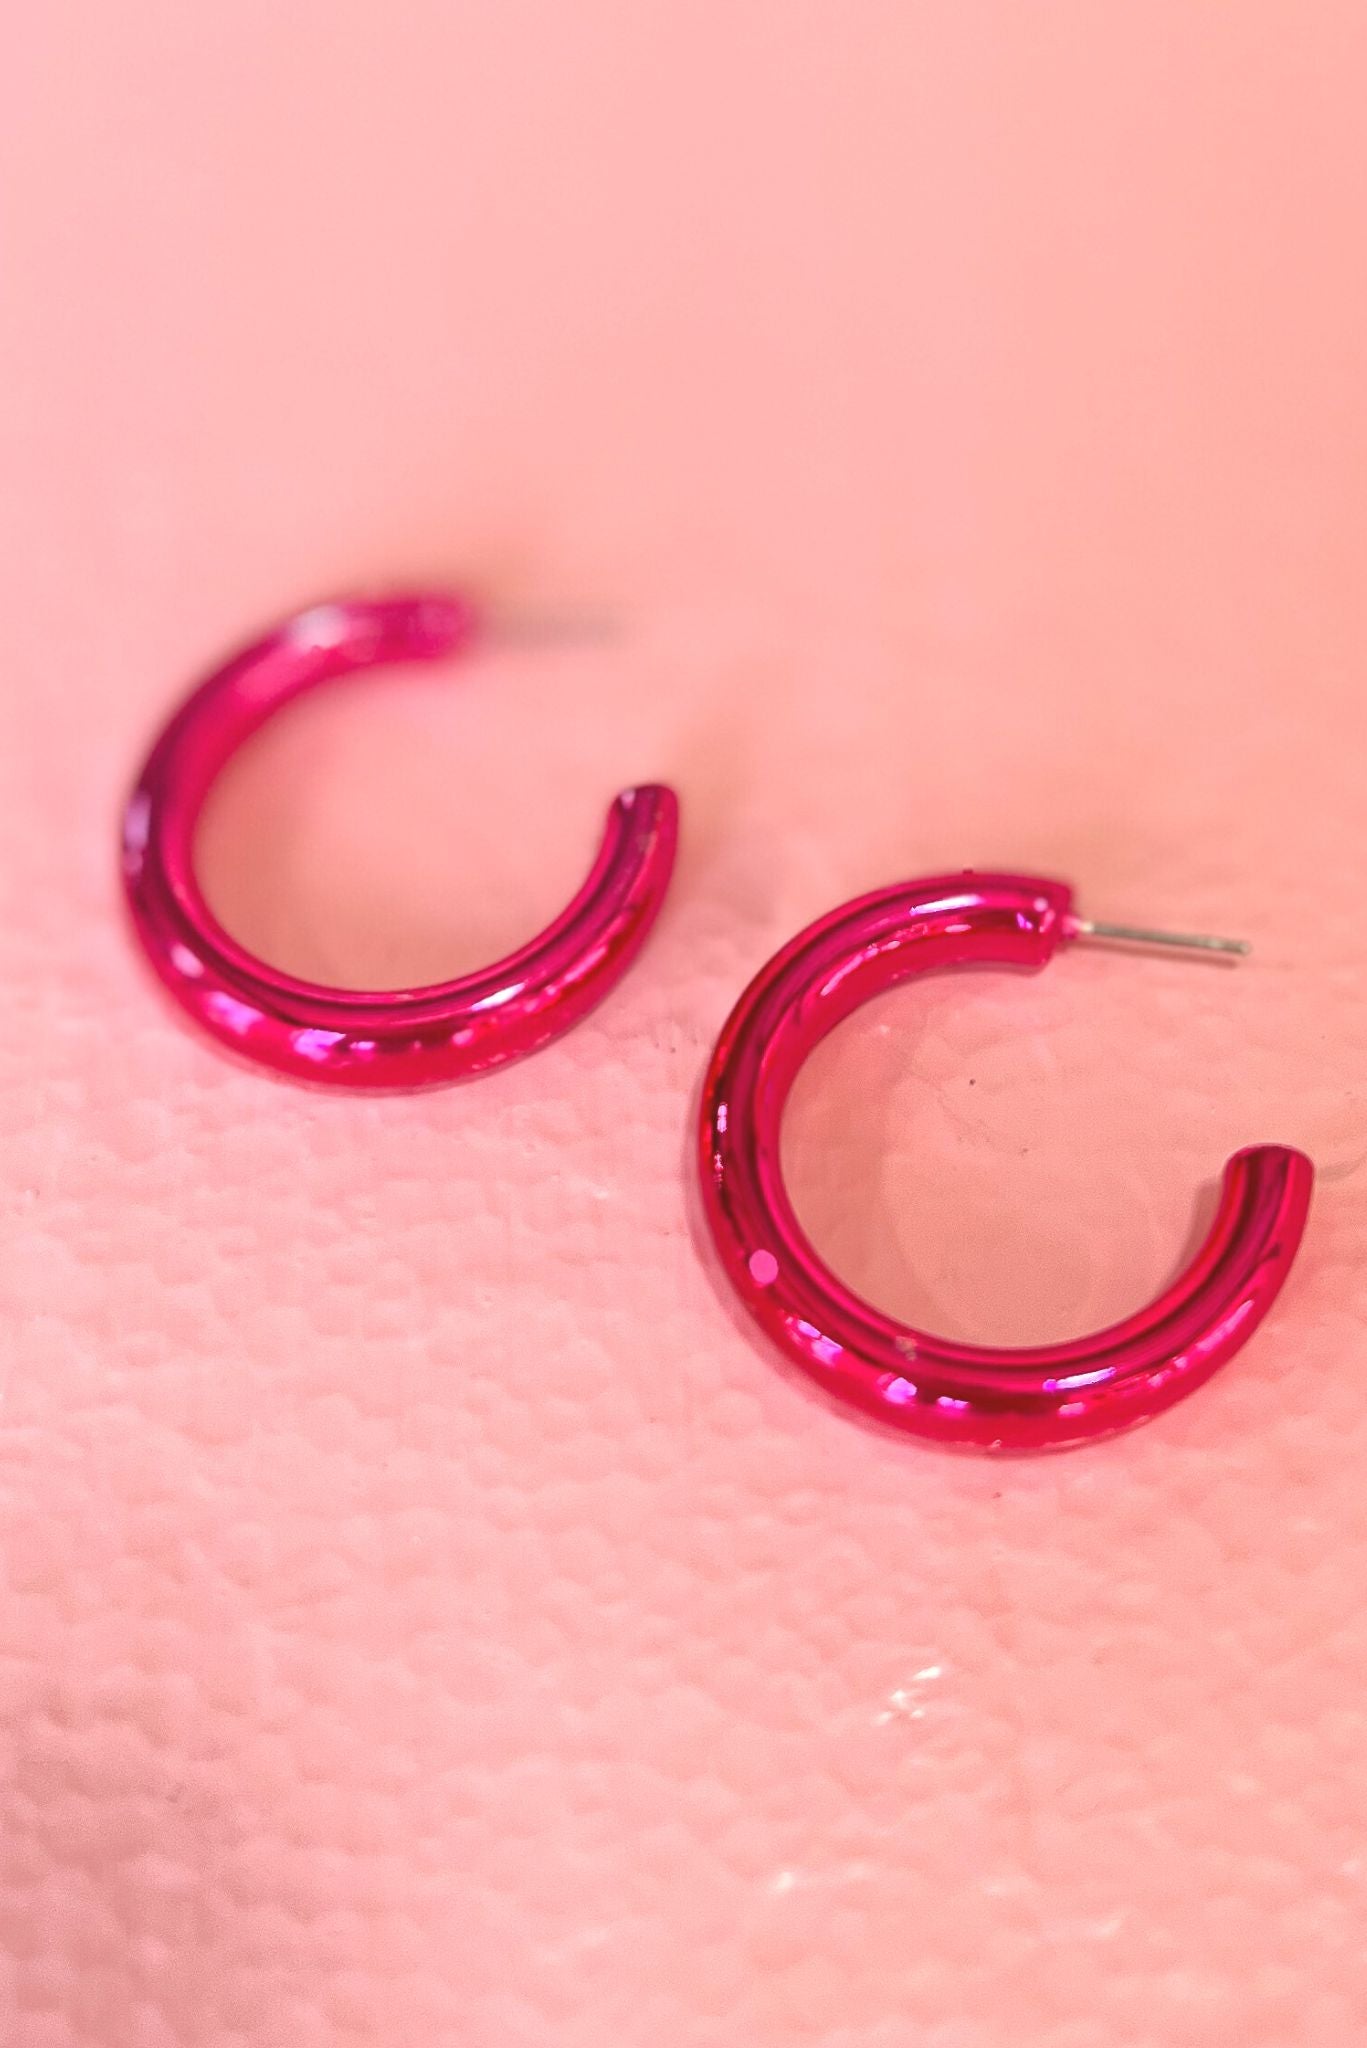 Shiny Fuchsia Thick Open Hoop EarringsEarrings, fall fashion, elevated look, hoop earrings, must have, mom style, date night, shop style your senses by mallory fitzsimmons